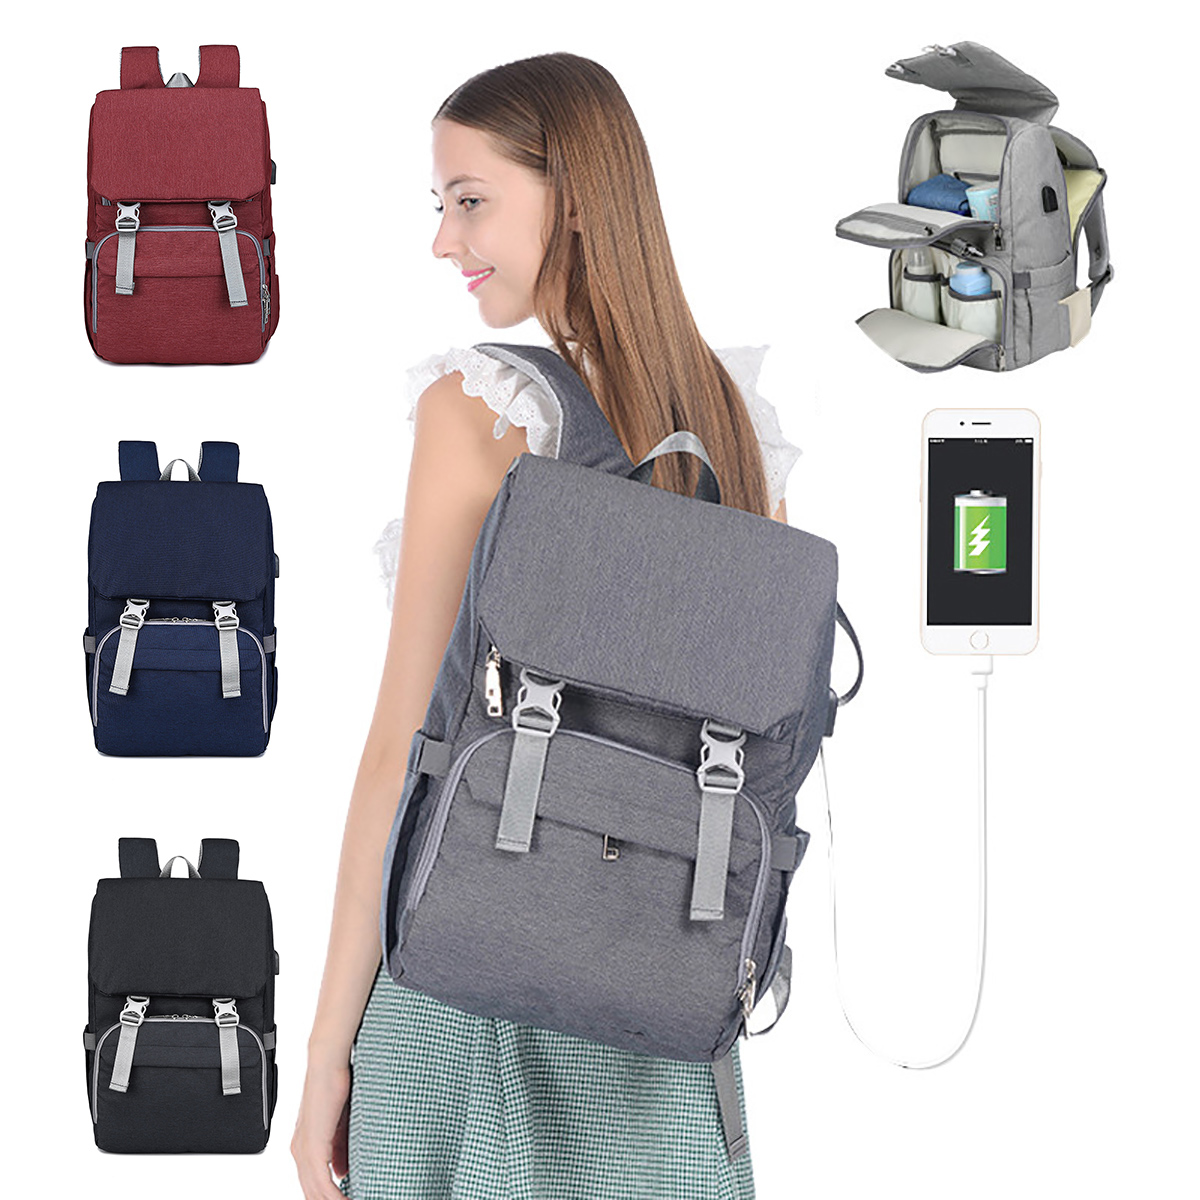 Outdoor-Mummy-Travel-Backpack-Large-Baby-Nappy-Changing-Bag--for-mom-Nursing-bag-1637117-1